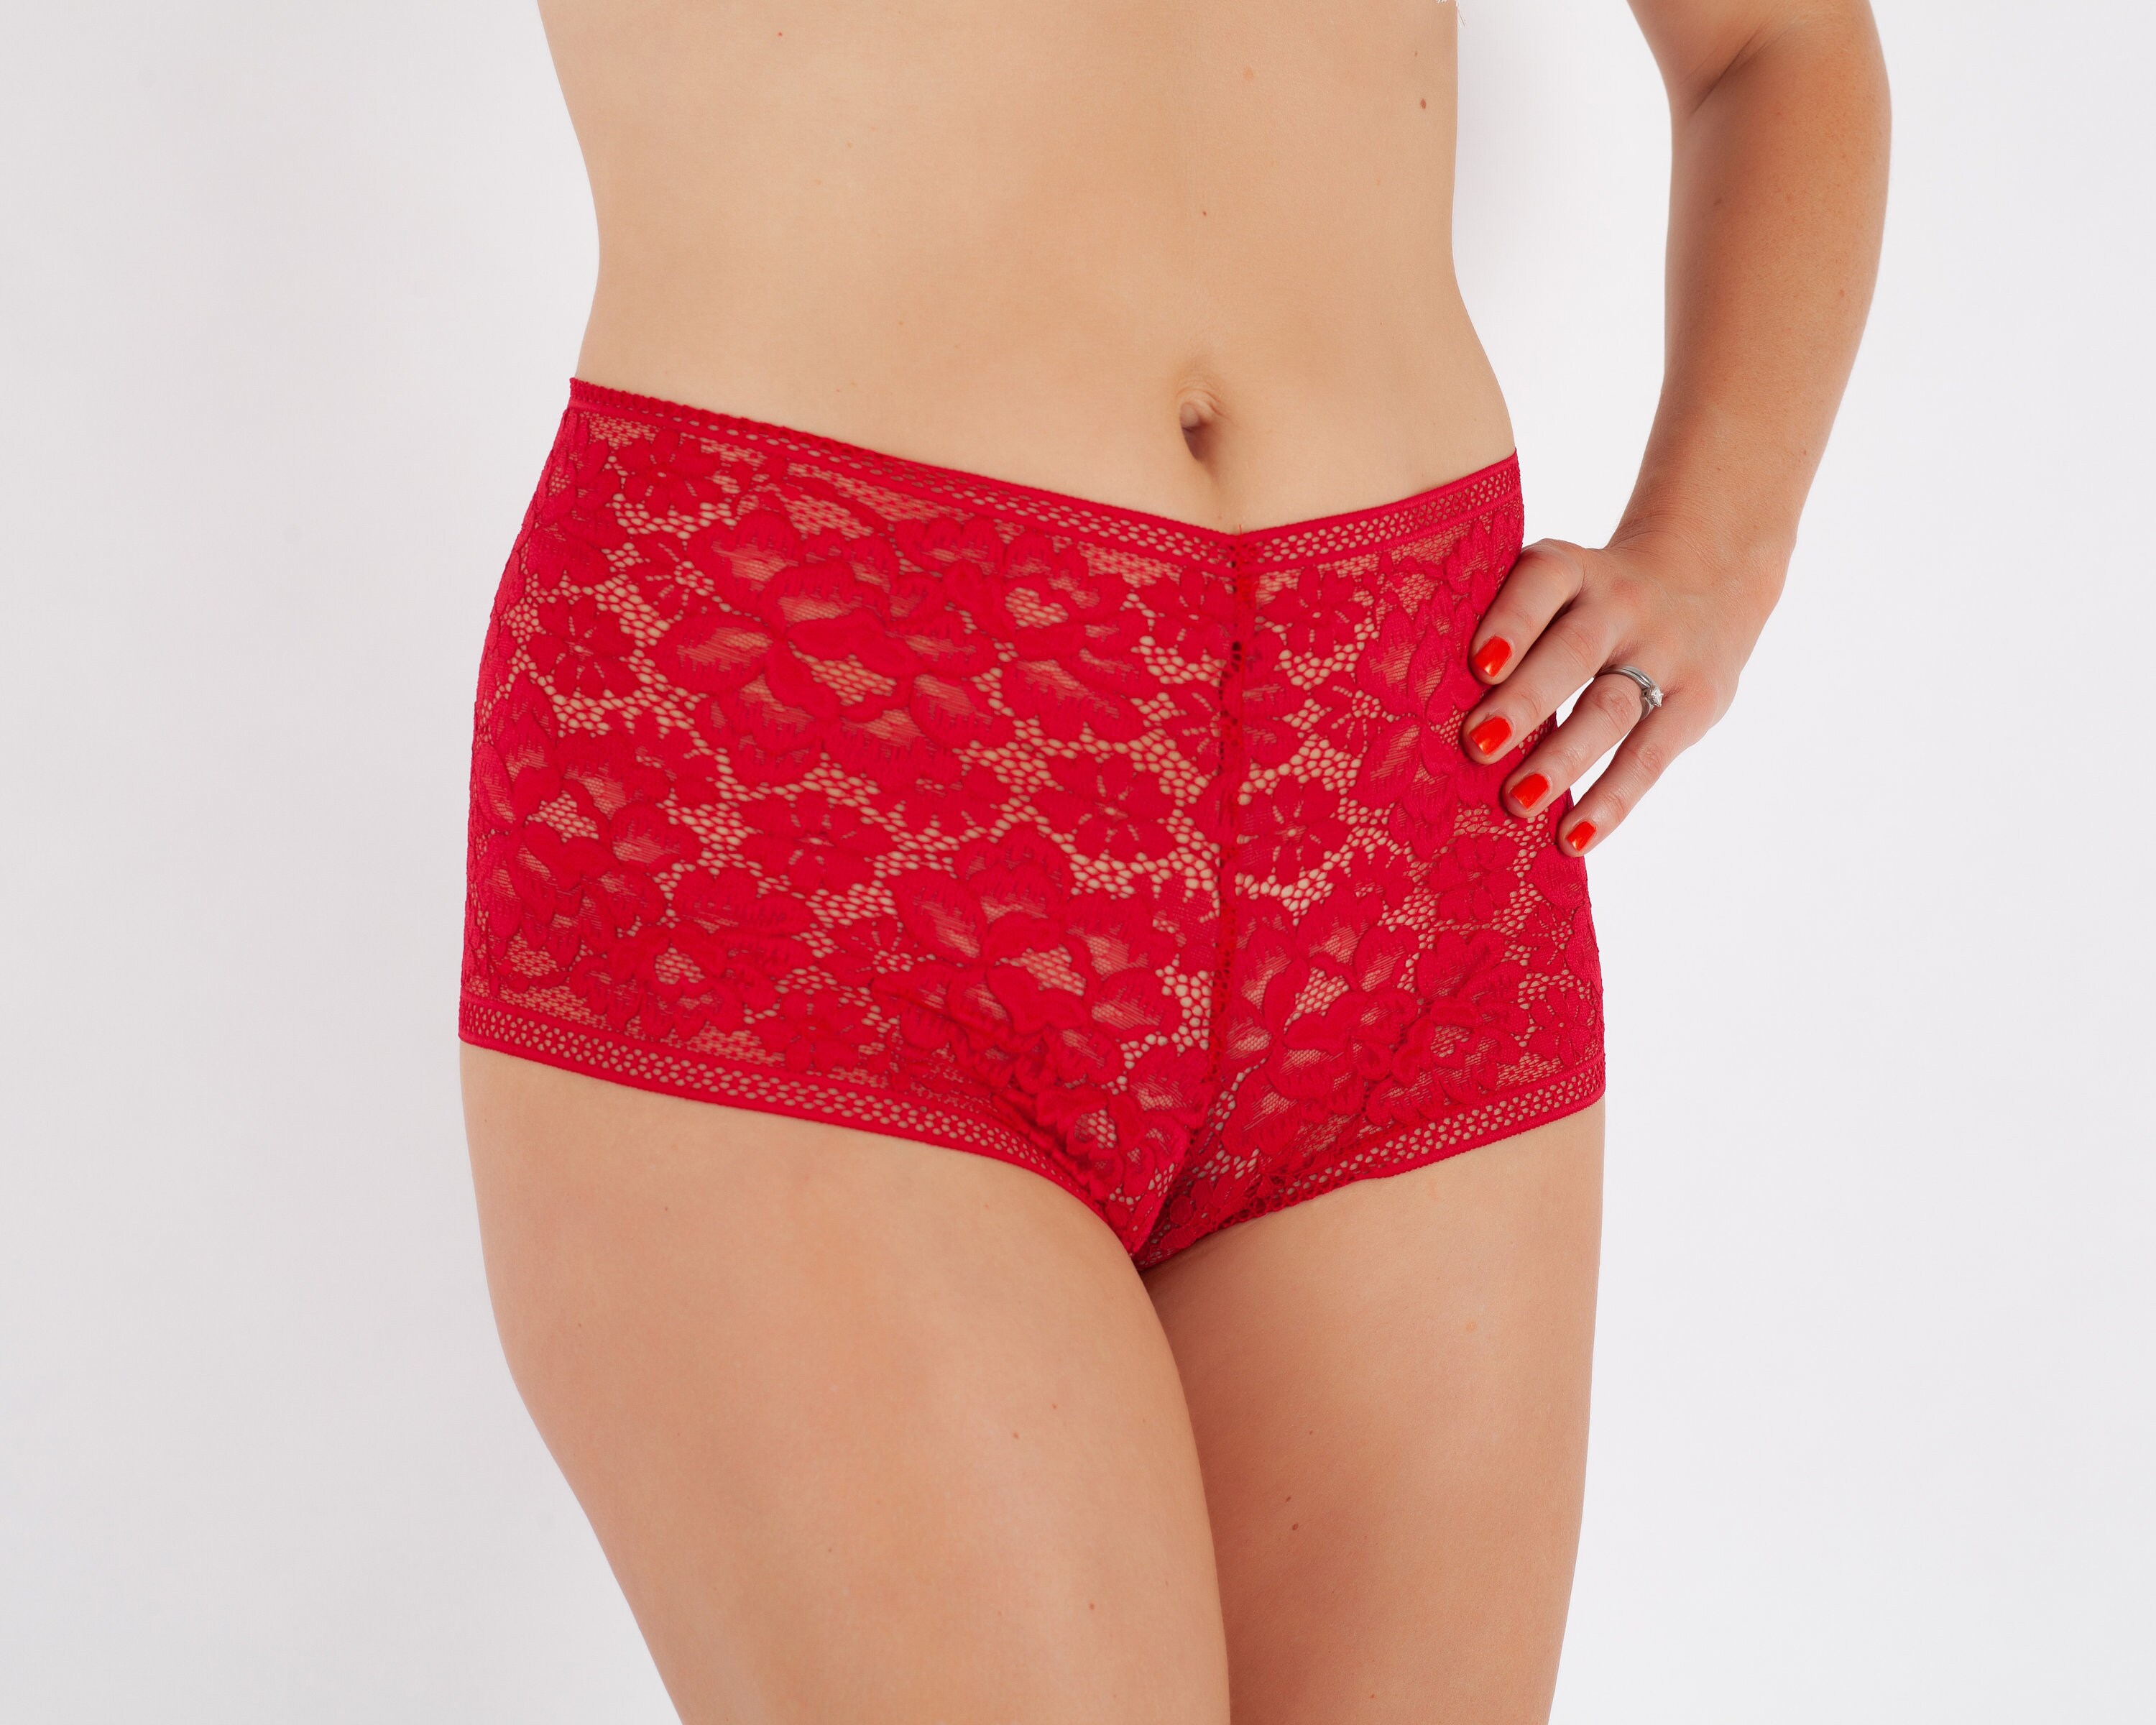 Red Lace Lingerie, Red Lace Knickers, Lace Panties, Red Panties